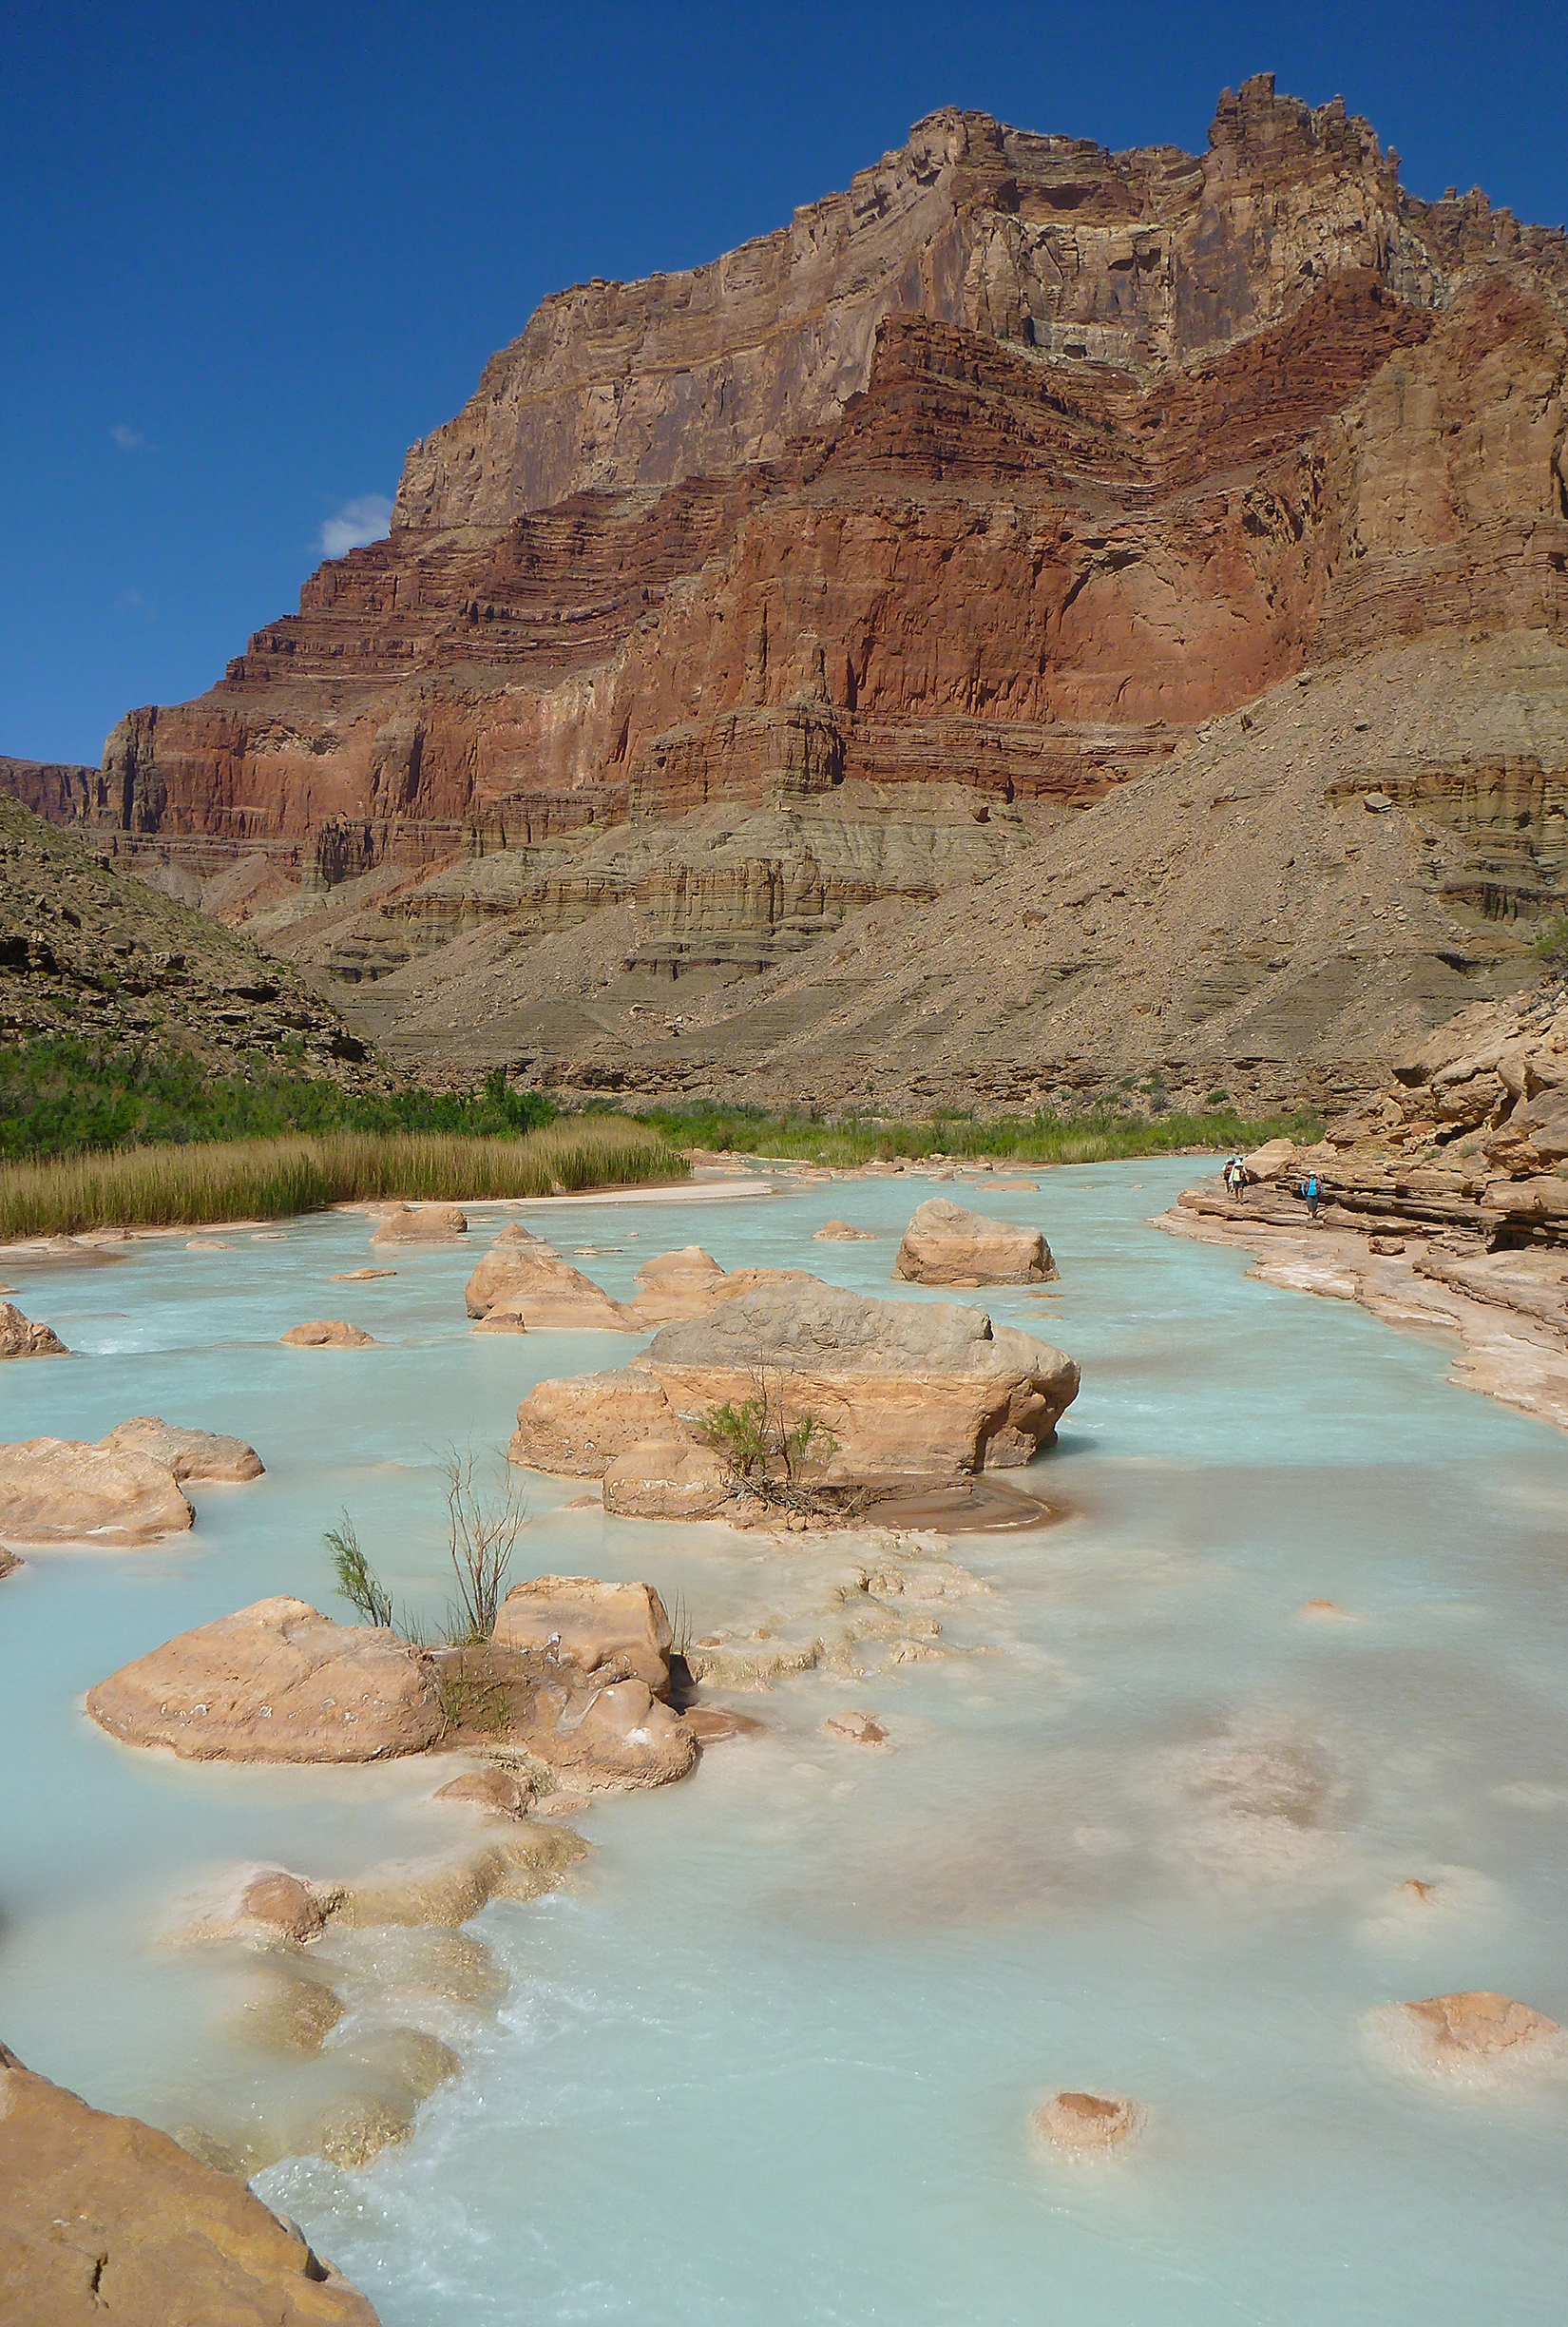 The turquoise waters of the Little Colorado River near its junction with the Colorado. Dissolved calcium makes for the vibrant color.